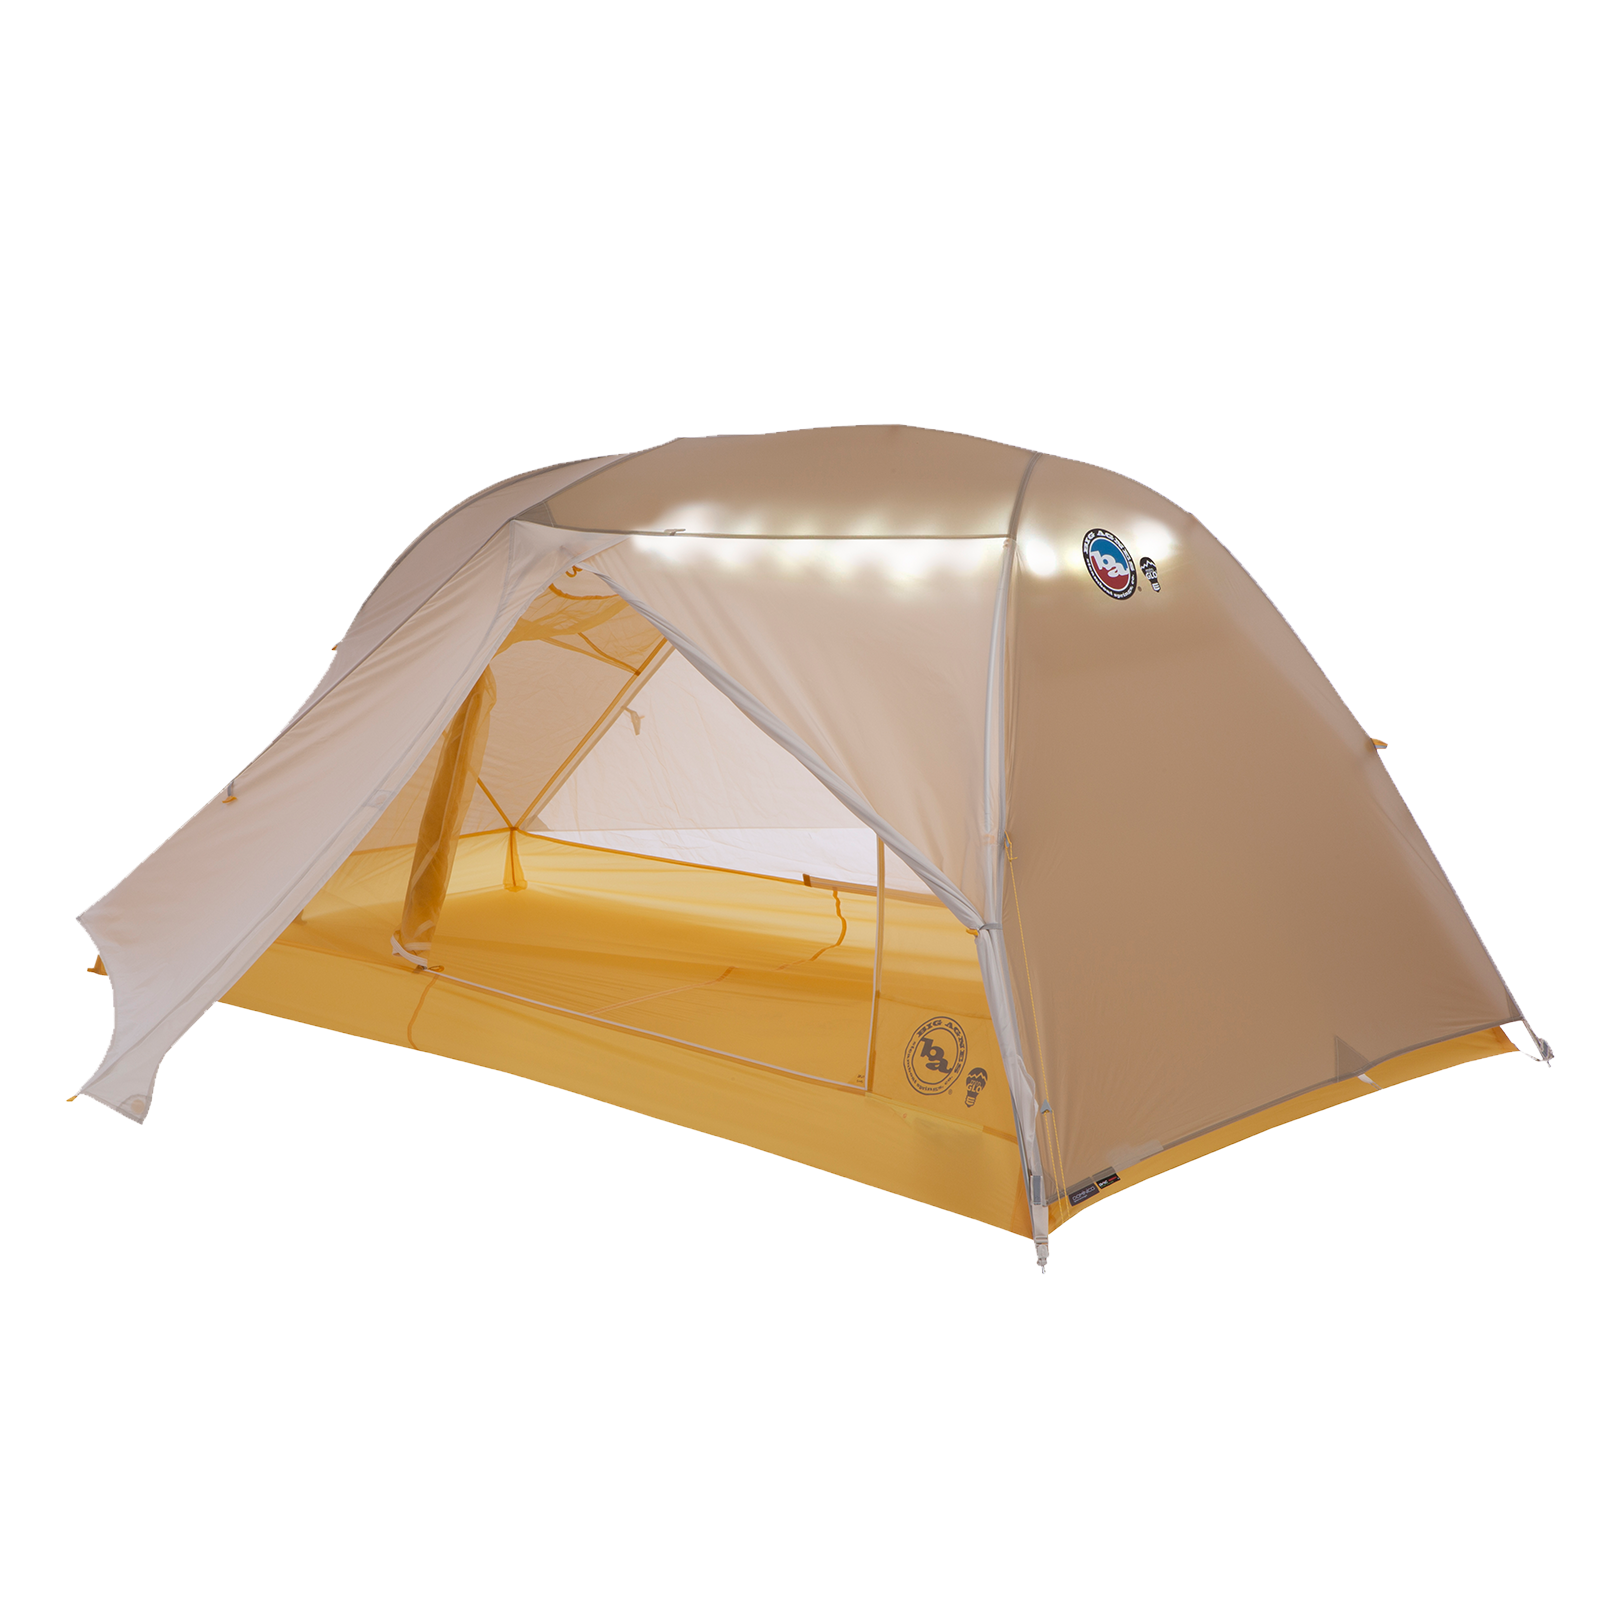 Big　UL2　Tent　Tiger　Solution　Ultralight　Dye　Agnes　Wall　mtnGLO®